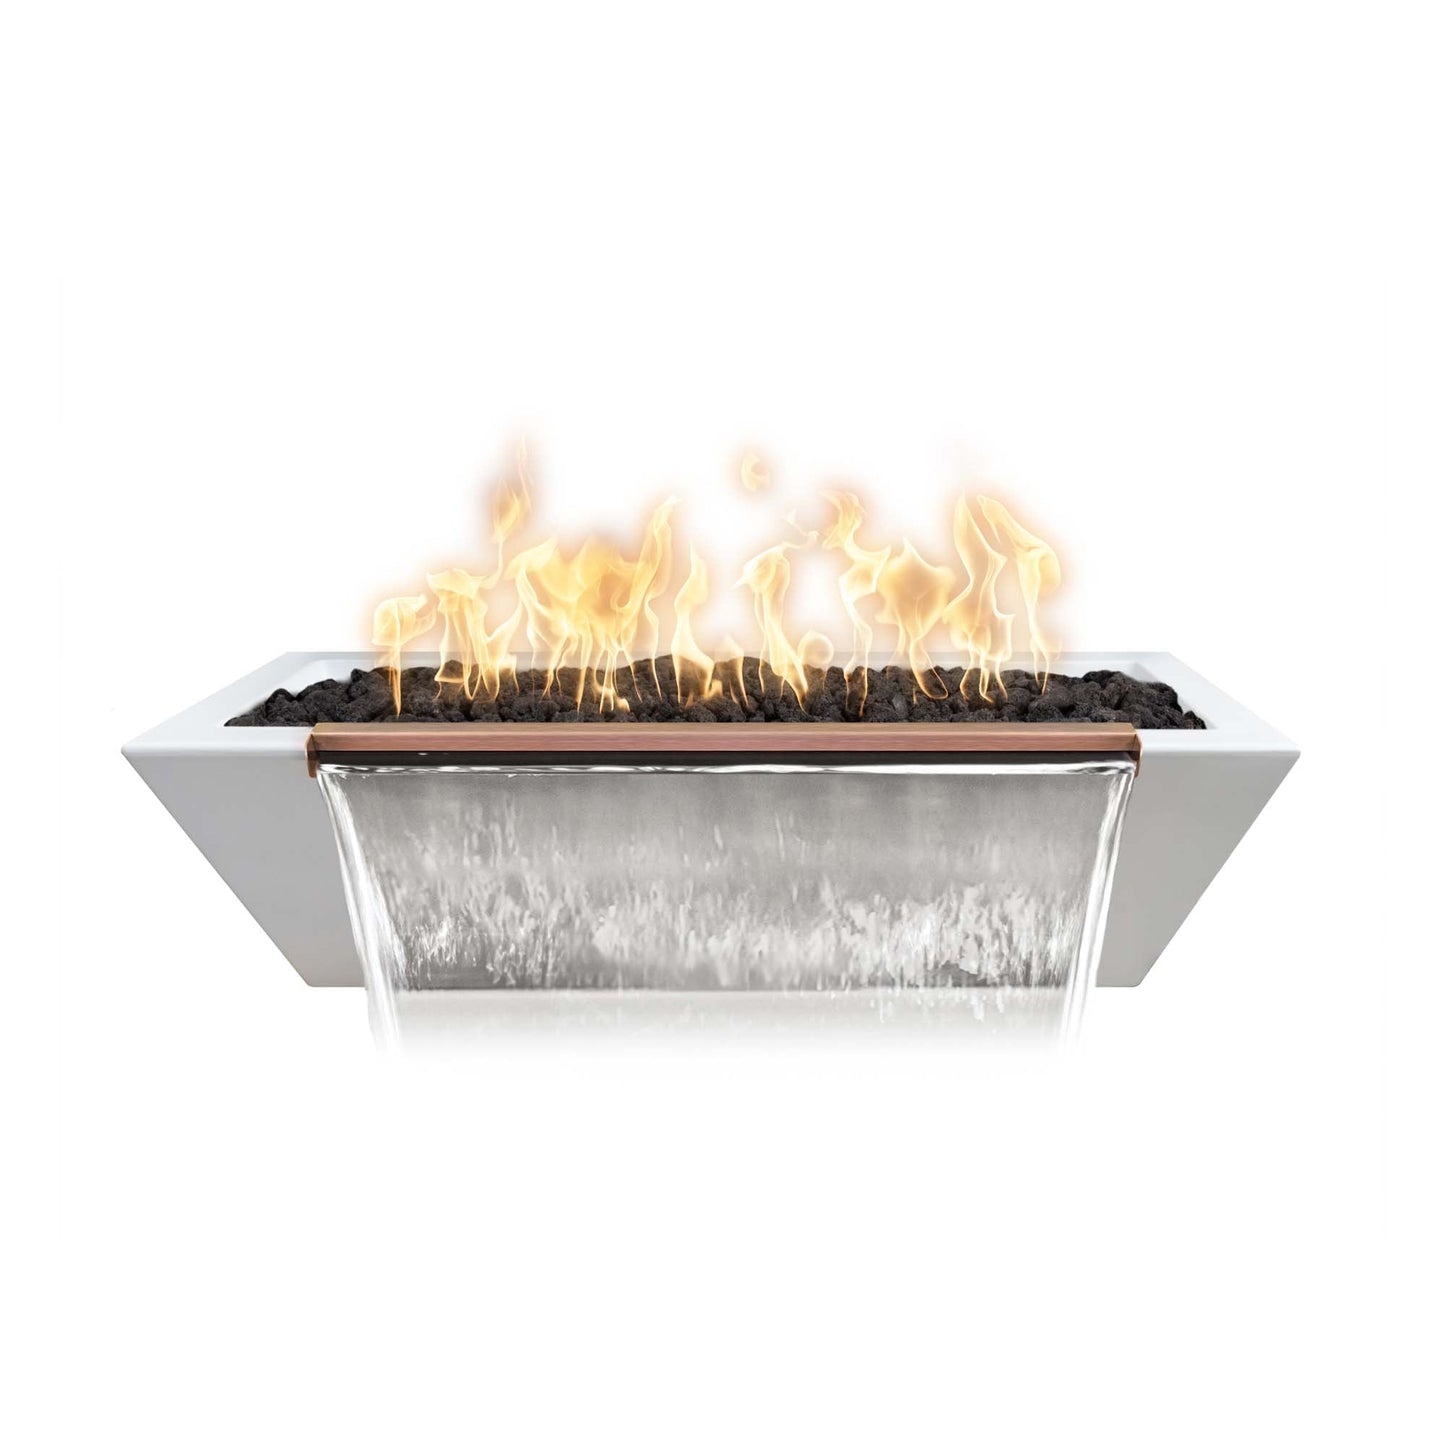 The Outdoor Plus Linear Maya 48" Metallic Silver GFRC Concrete Liquid Propane Fire & Water Bowl with Match Lit with Flame Sense Ignition